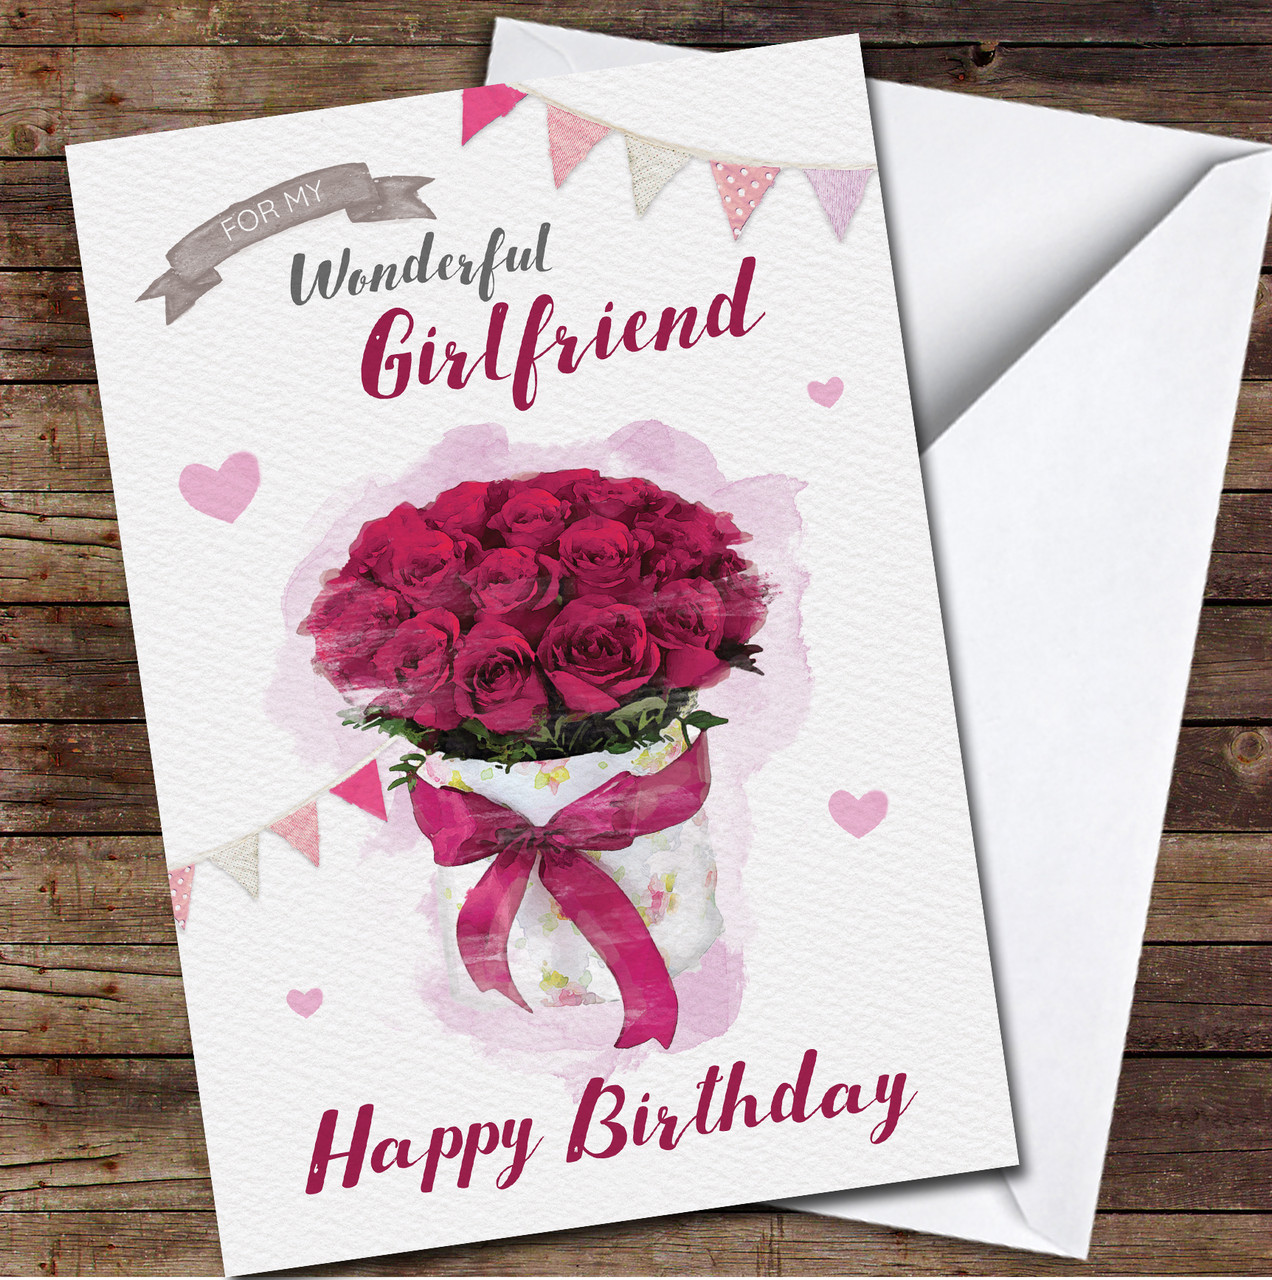 Personalized Birthday Cards For Your Girlfriends